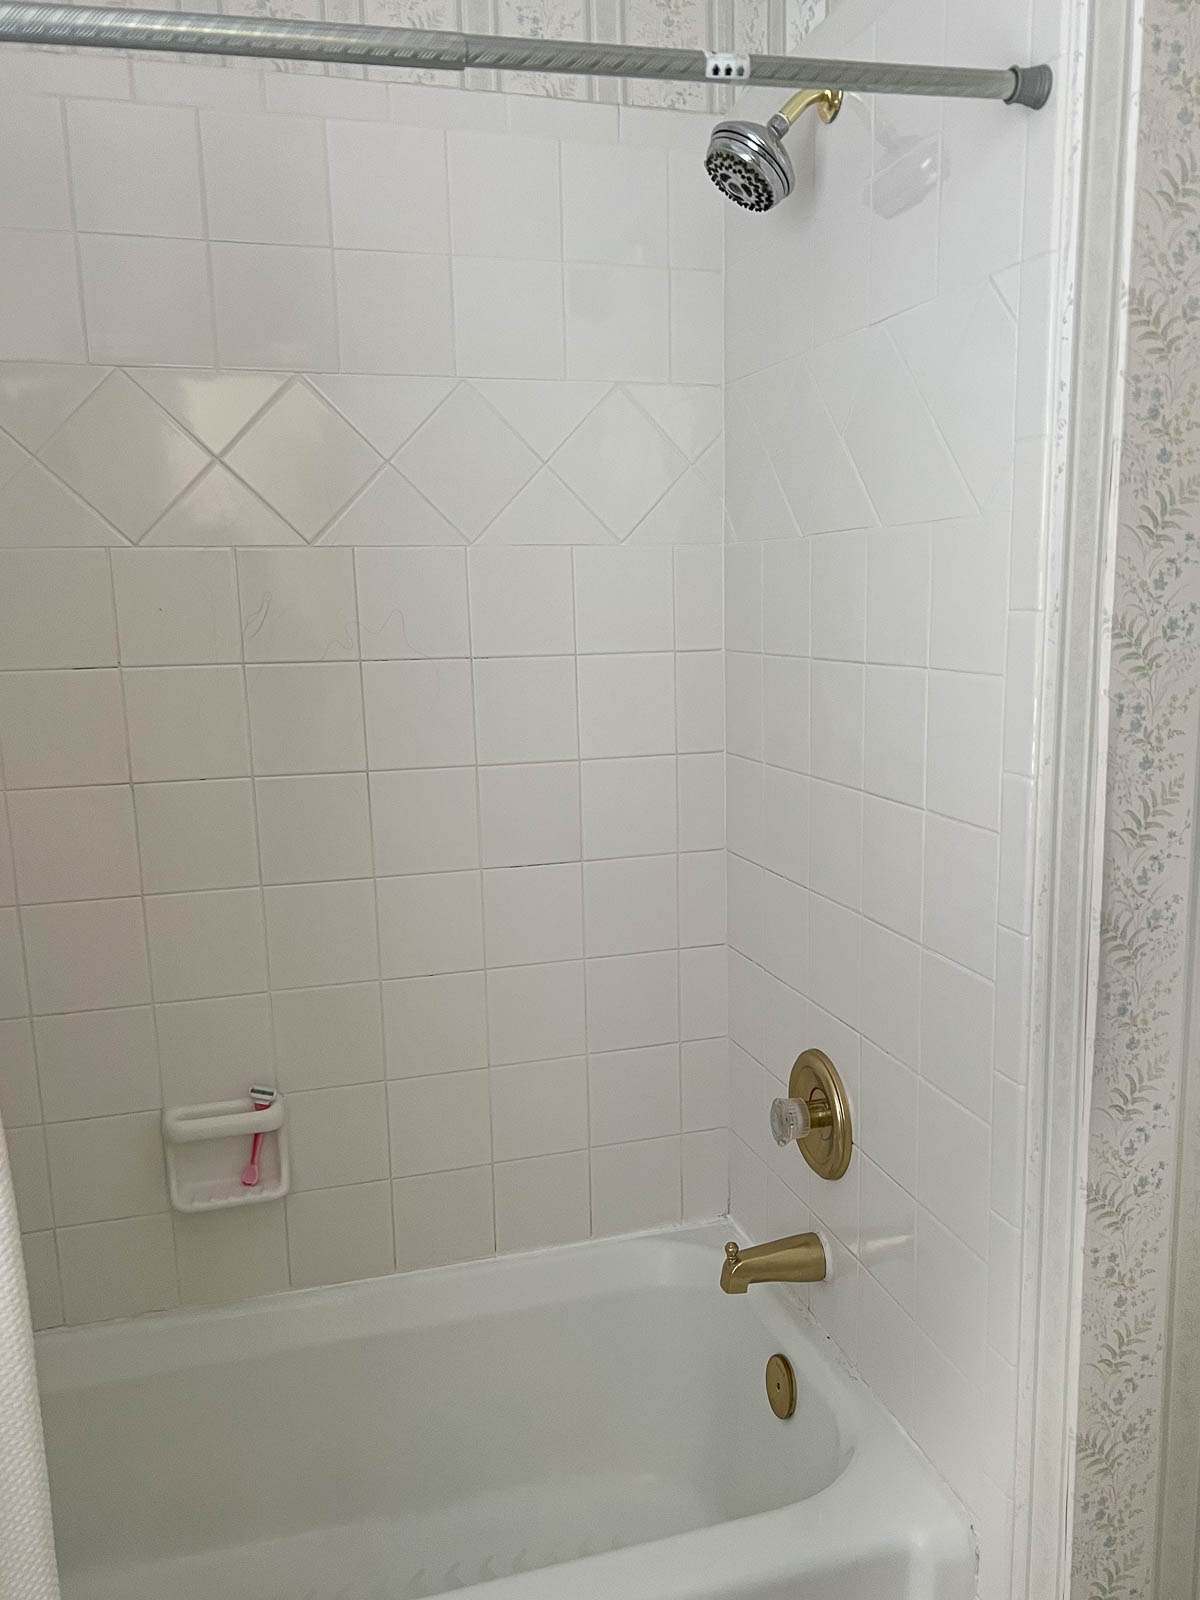 Shower before remodeling with old brass hardware